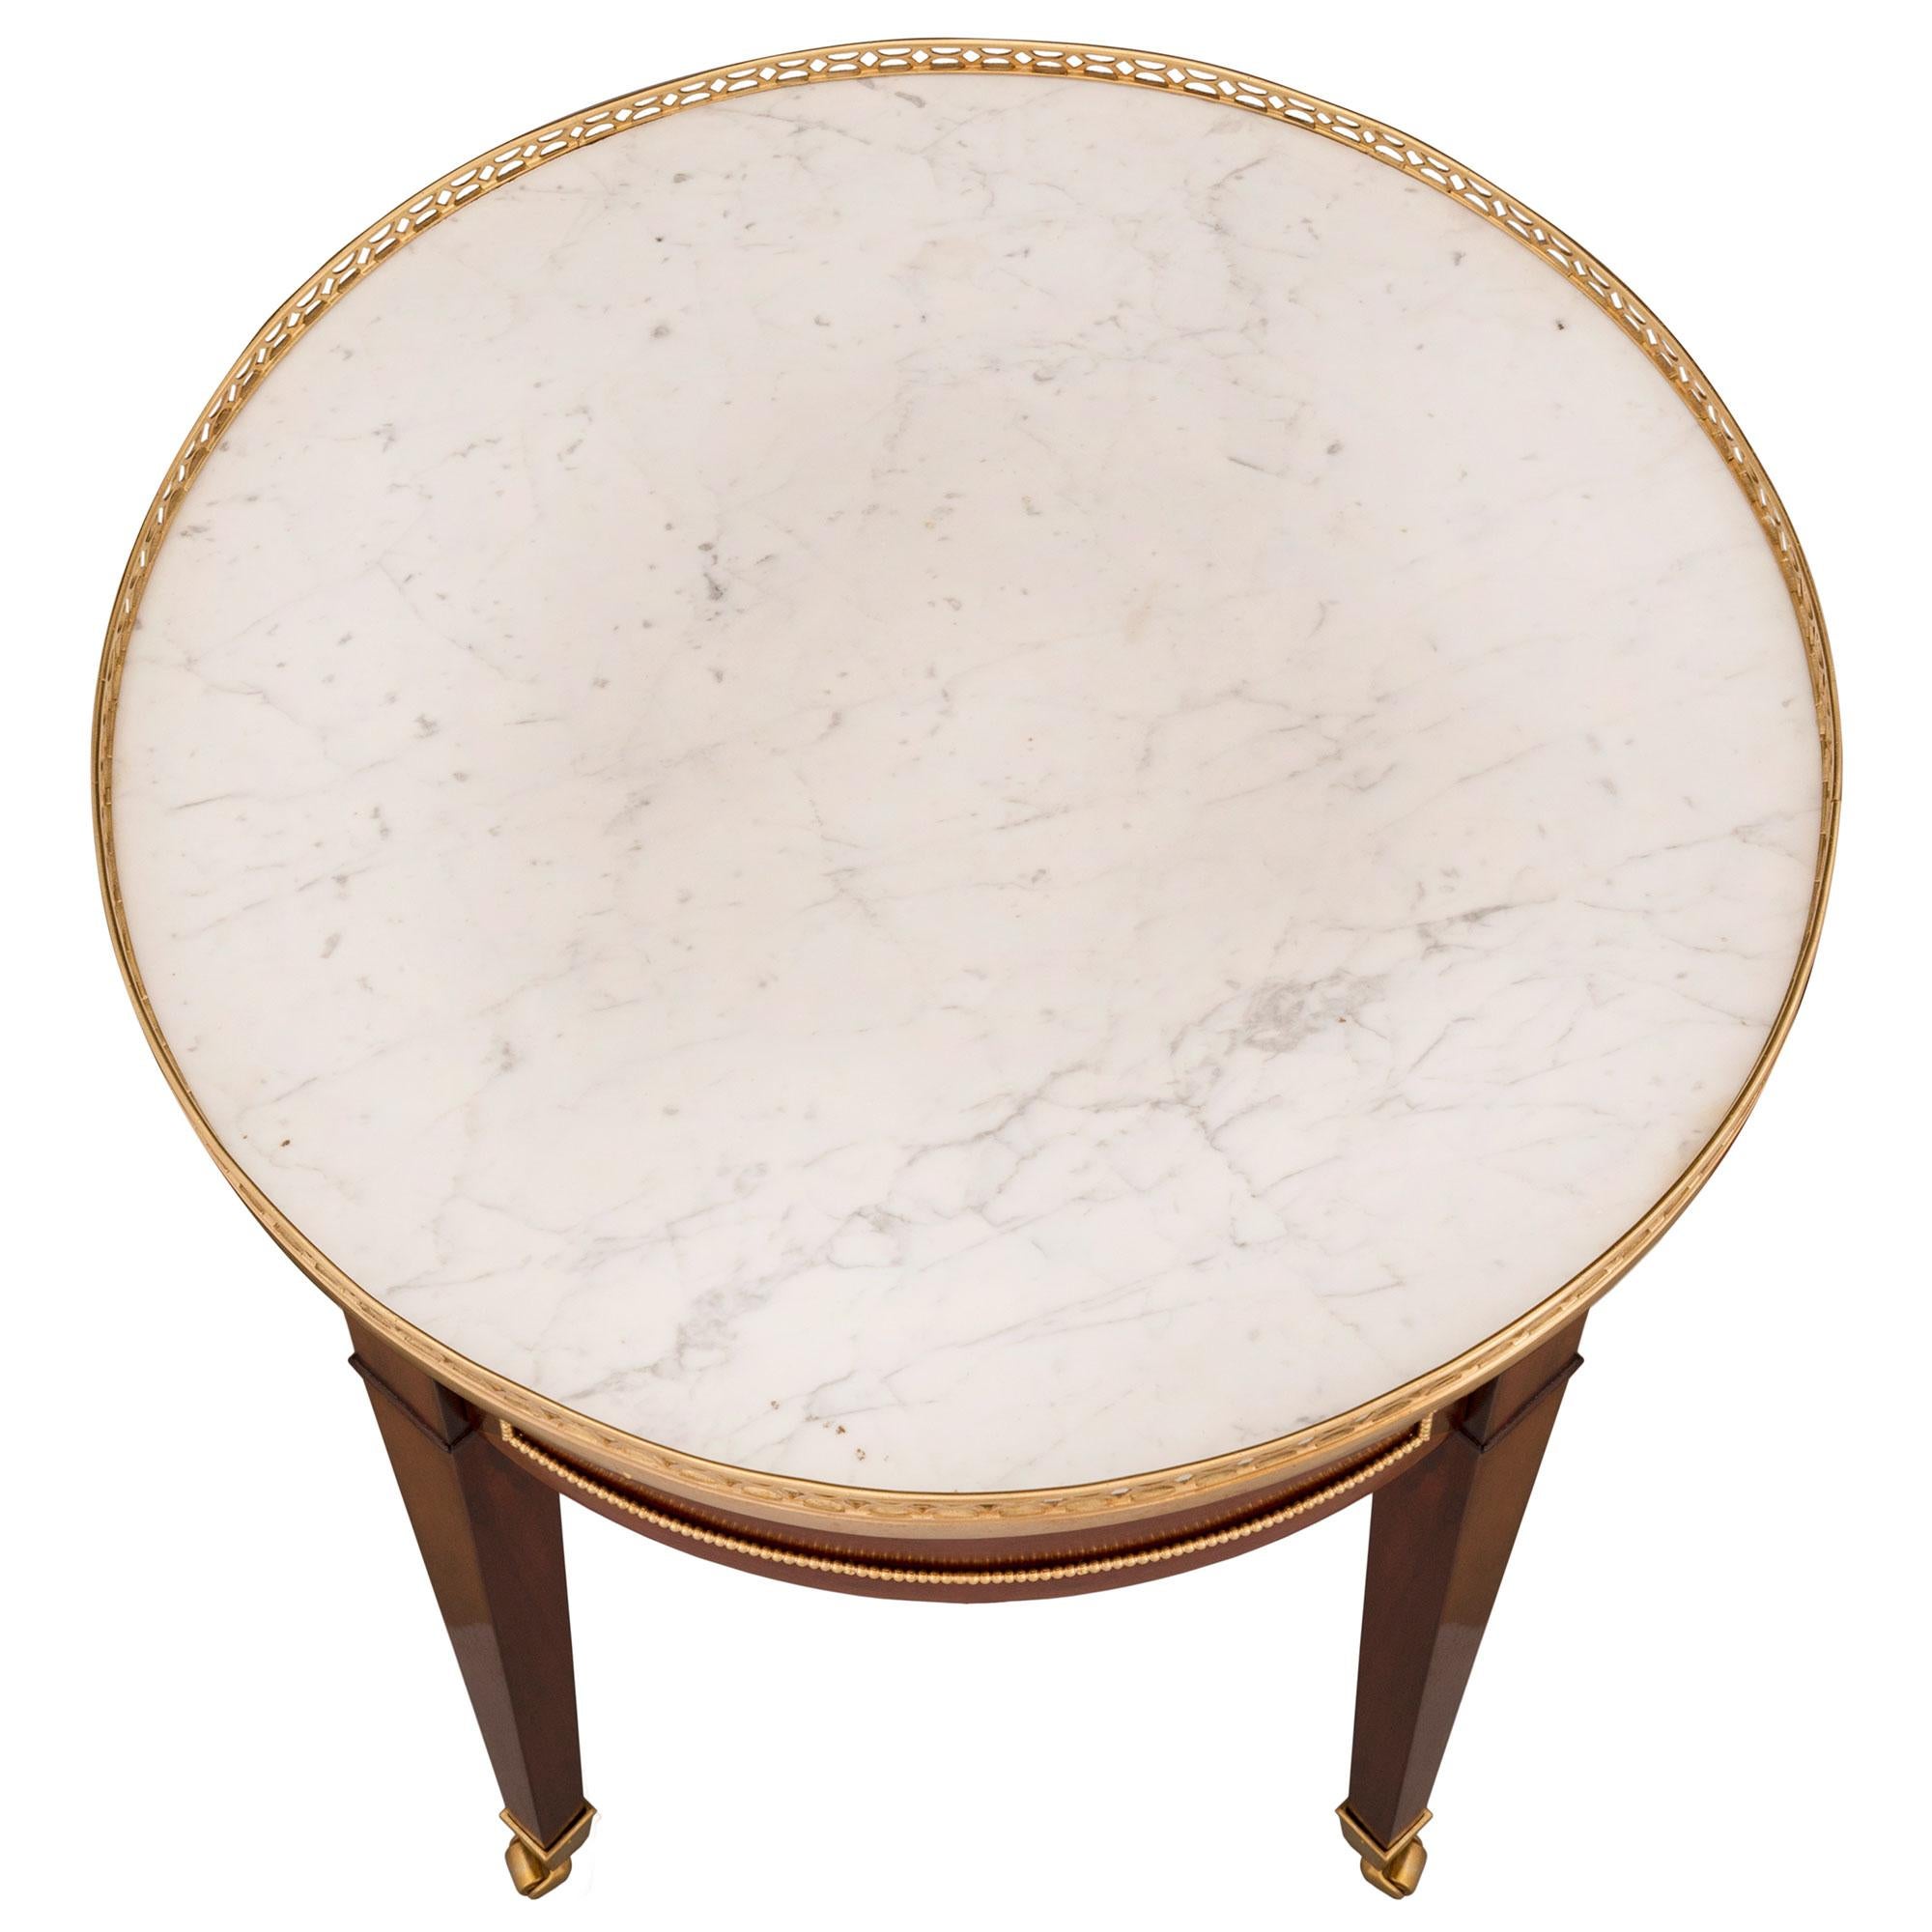 A superb French 18th century Louis XVI st. mahogany, ormolu and white Carrara marble side table. The table is raised by elegant square tapered legs with their original unique and most decorative casters. The apron displays four recessed panels with